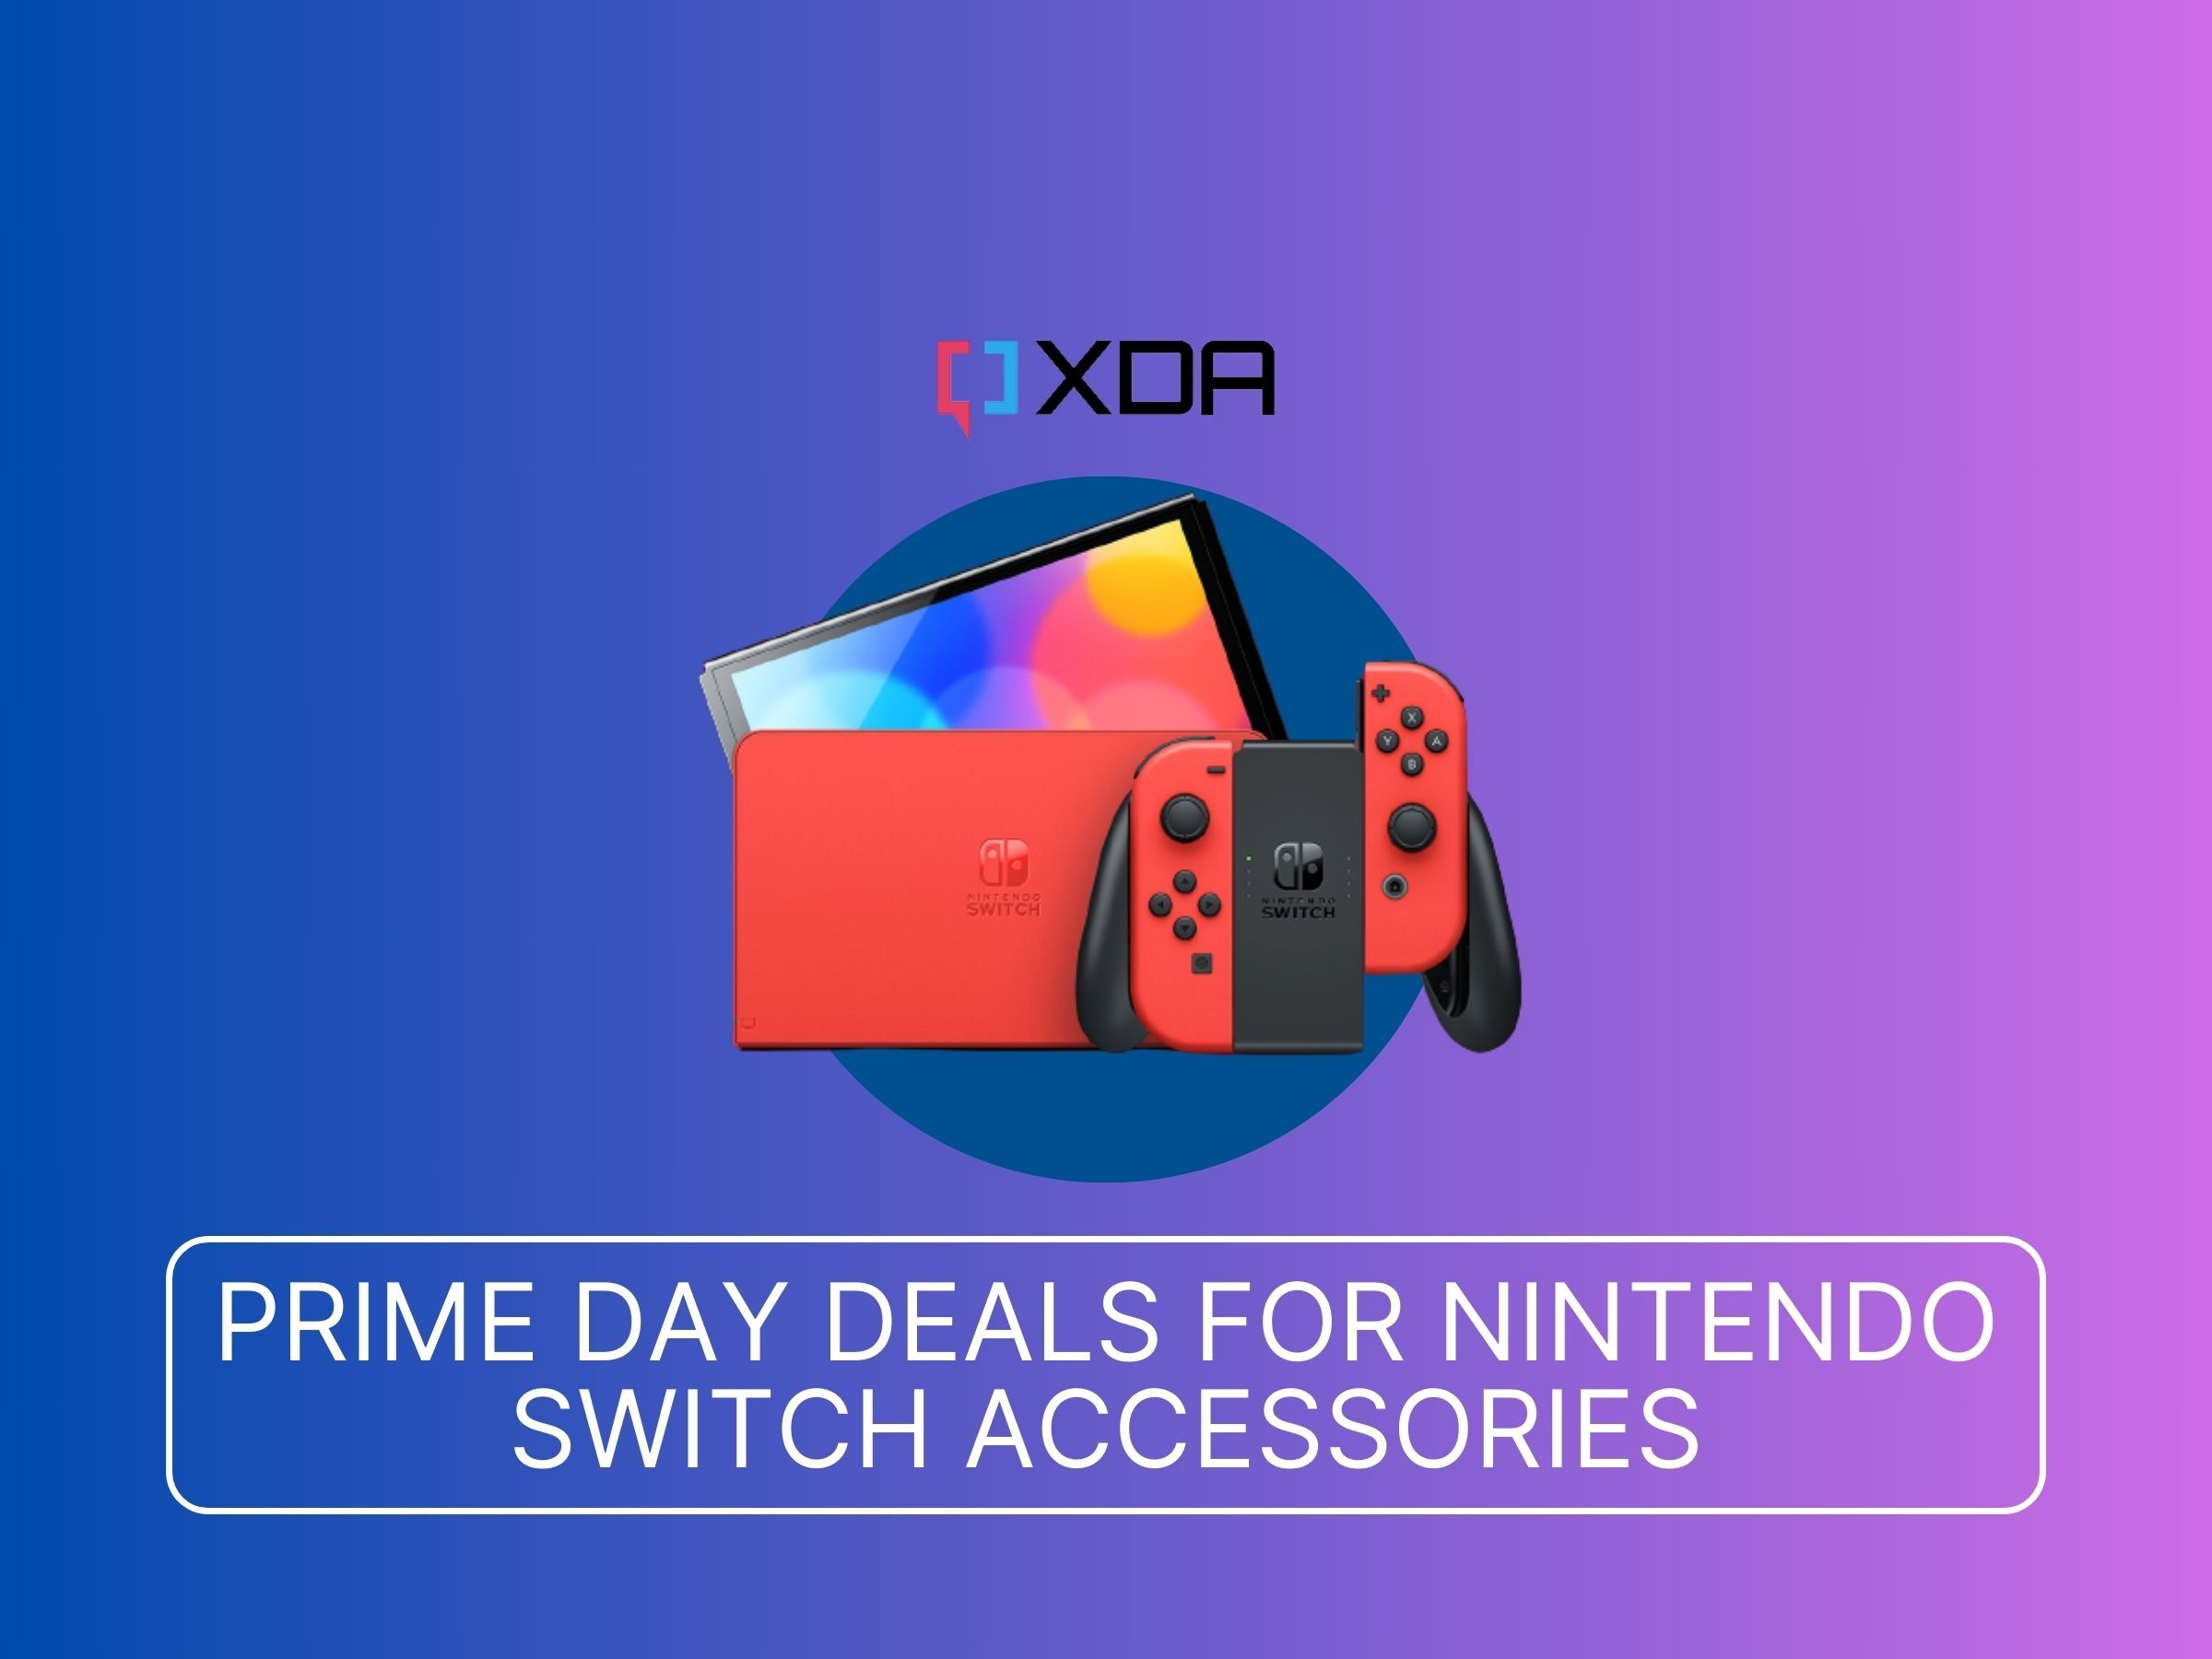 Prime Day Deals for Nintendo Switch Accessories